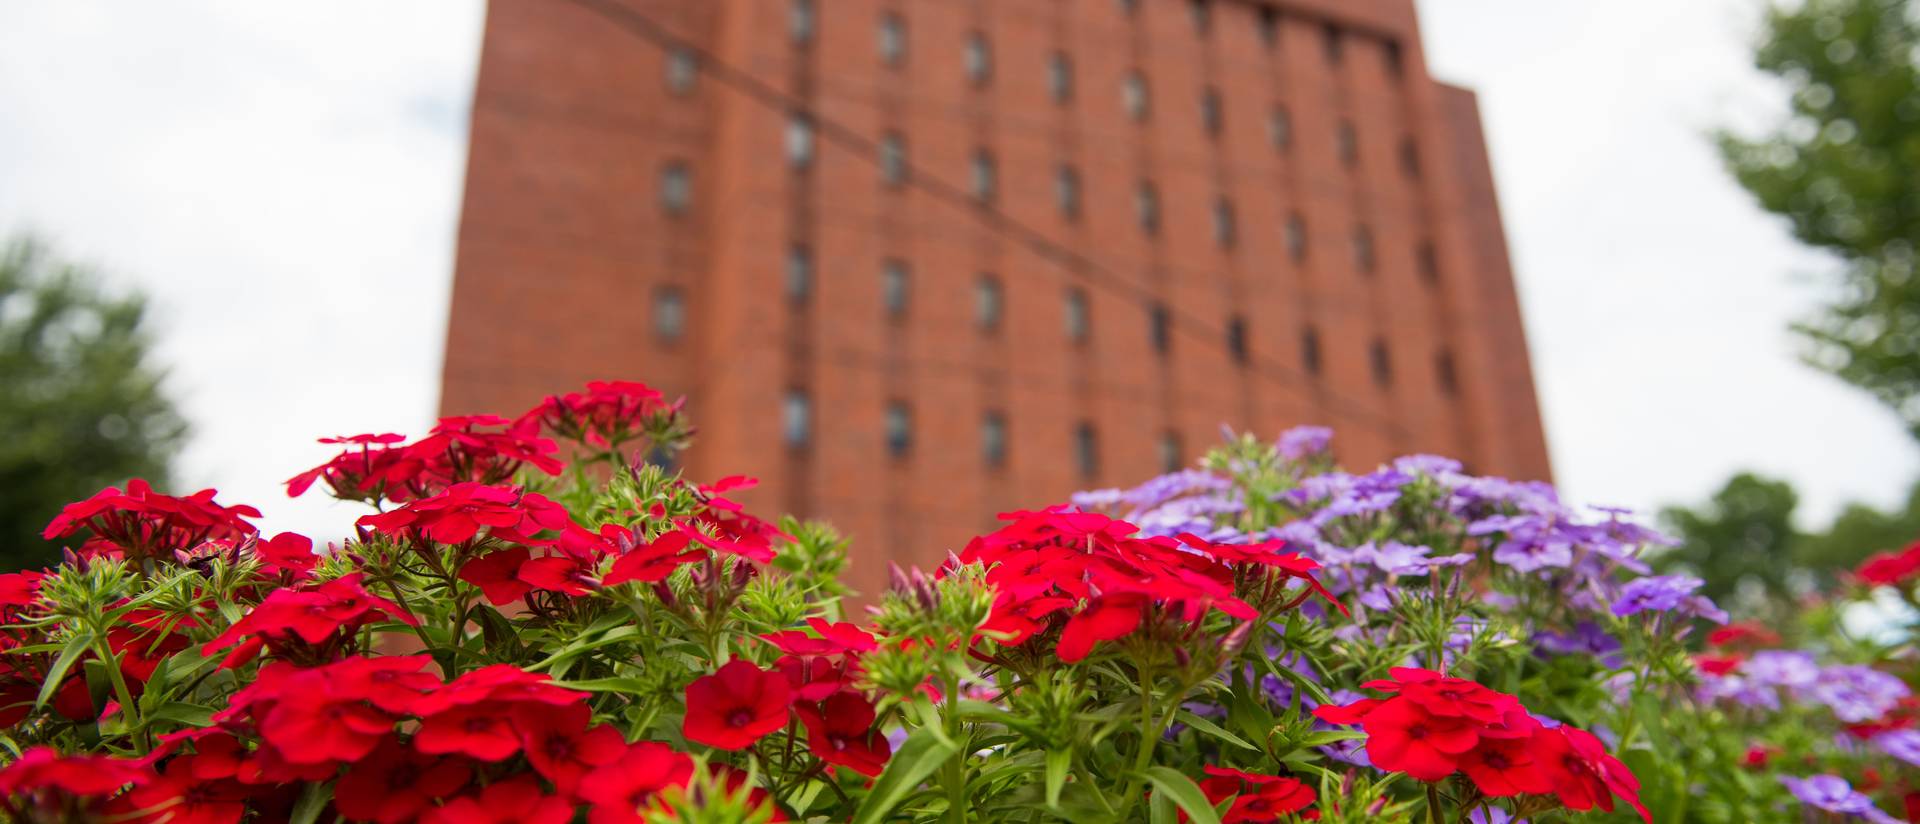 Close-up of red and purple flowers with Hibbard Hall in the background.